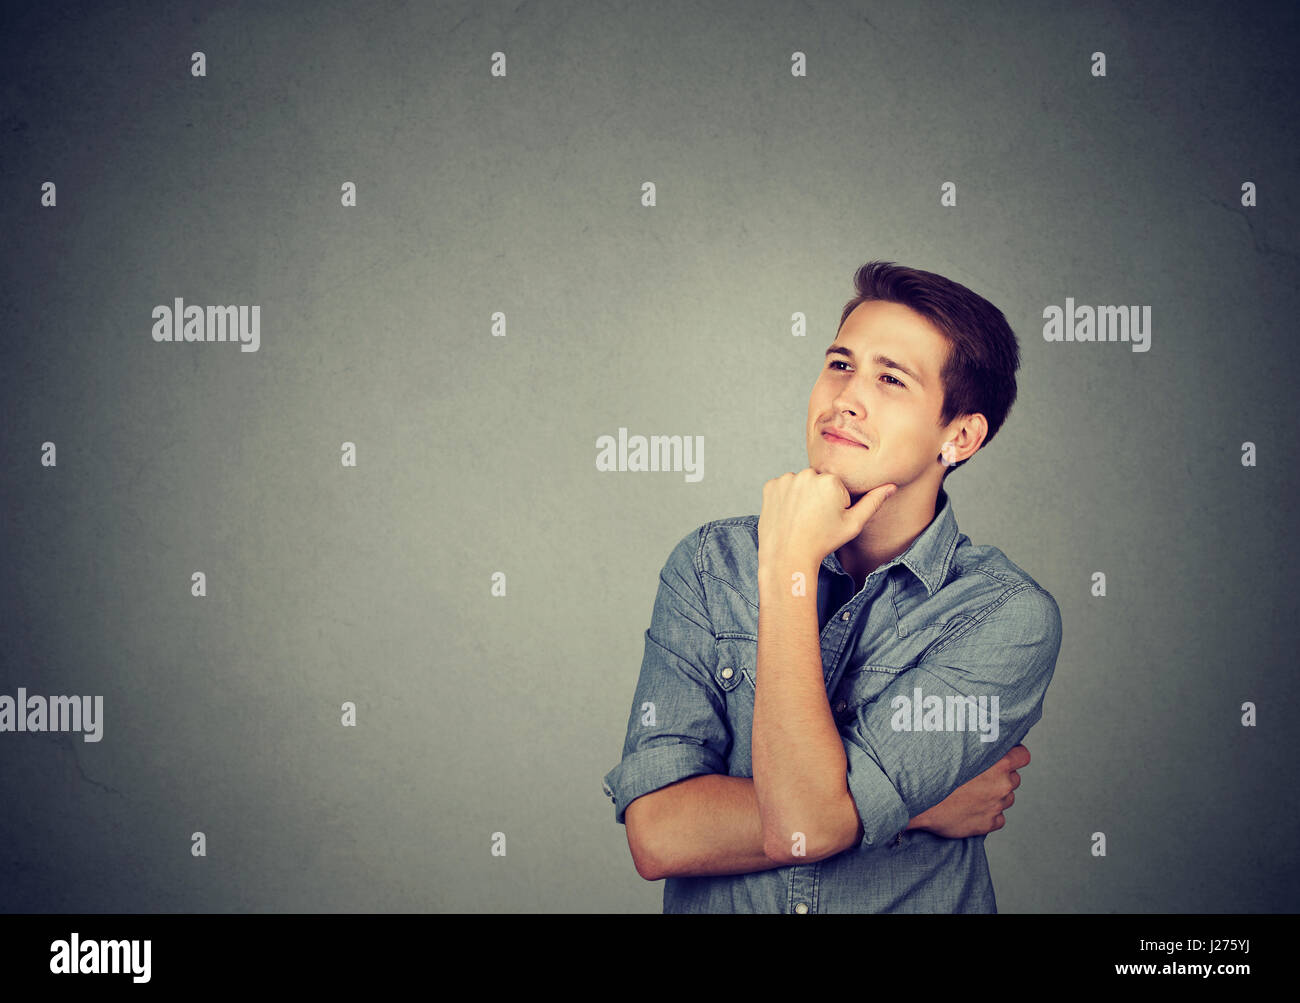 Happy young man thinking daydreaming looking up isolated on gray wall background Stock Photo